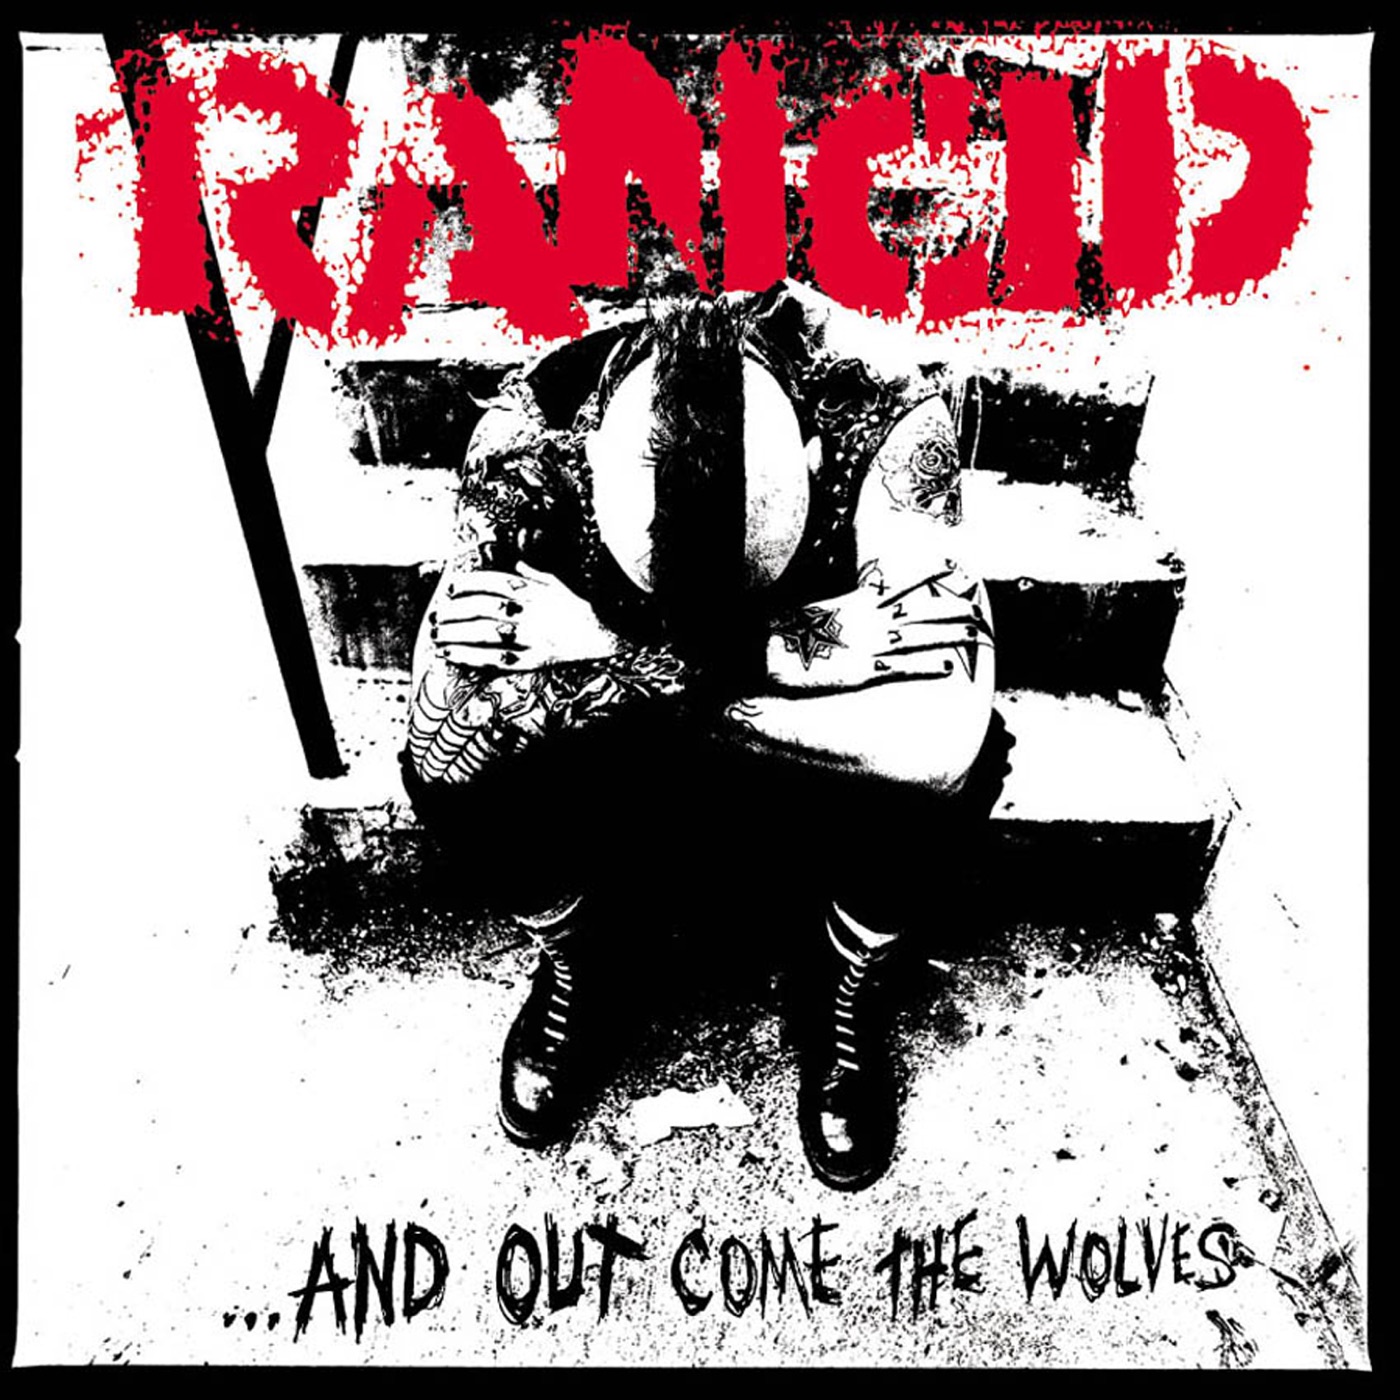 ...And Out Come The Wolves by Rancid